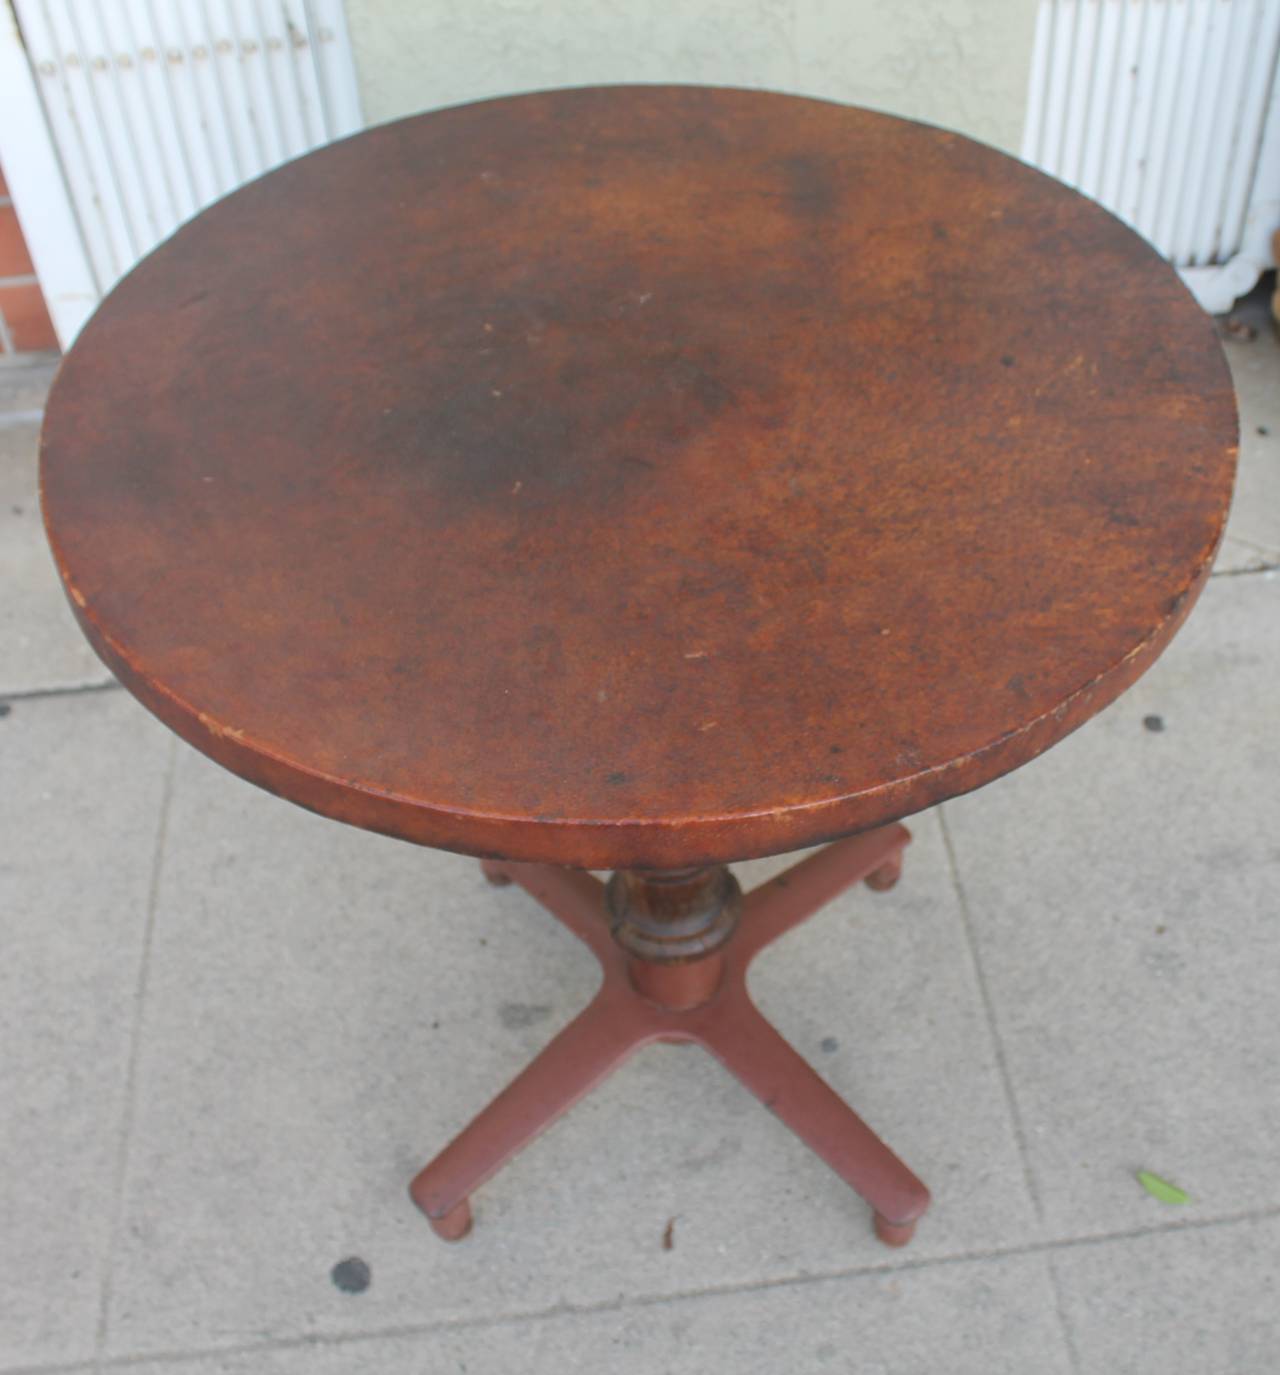 Wood Rustic 19th Century Industrial Gaming Table with a Leather Top